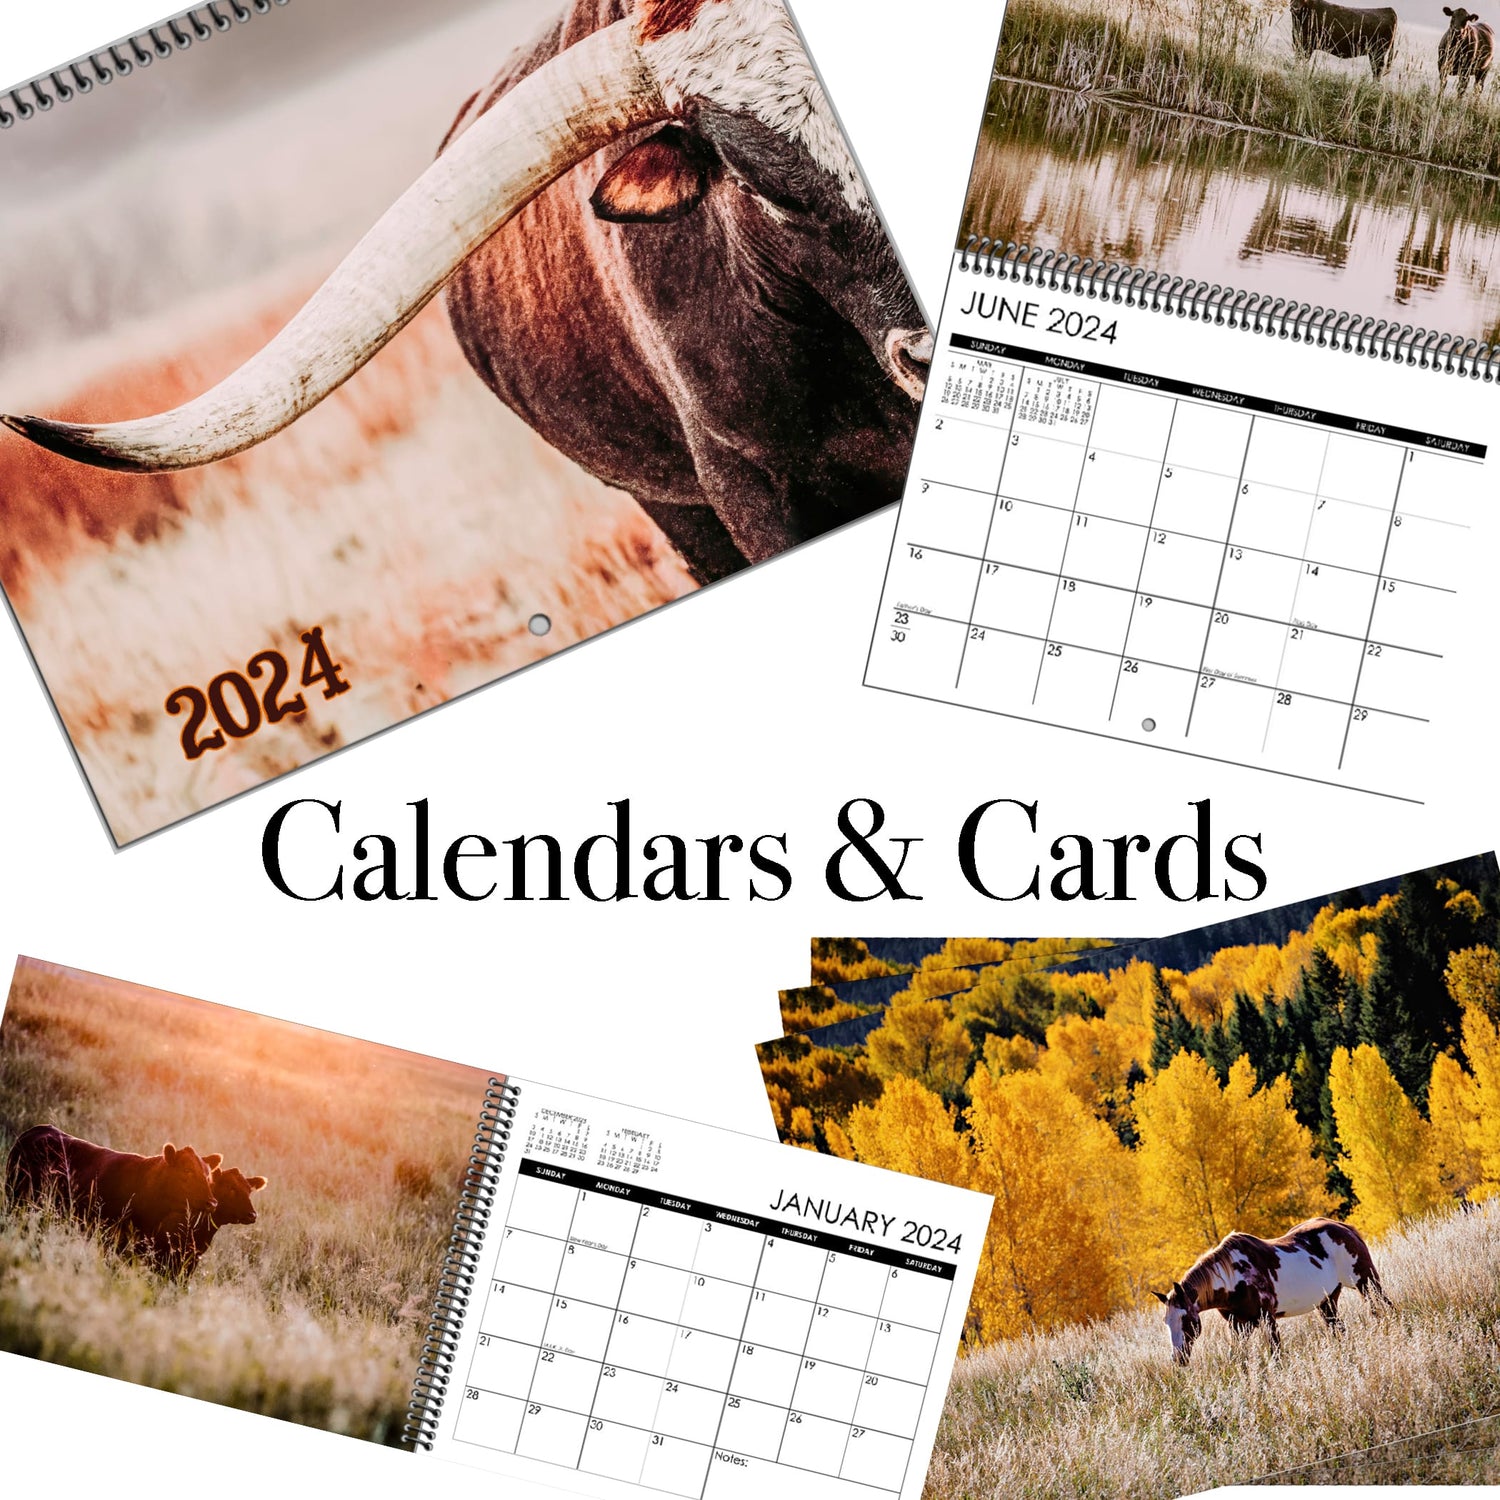 Western calendars and greeting cards featuring photos of Texas Longhorns, Black Angus cattle, horses, old barns and windmills.